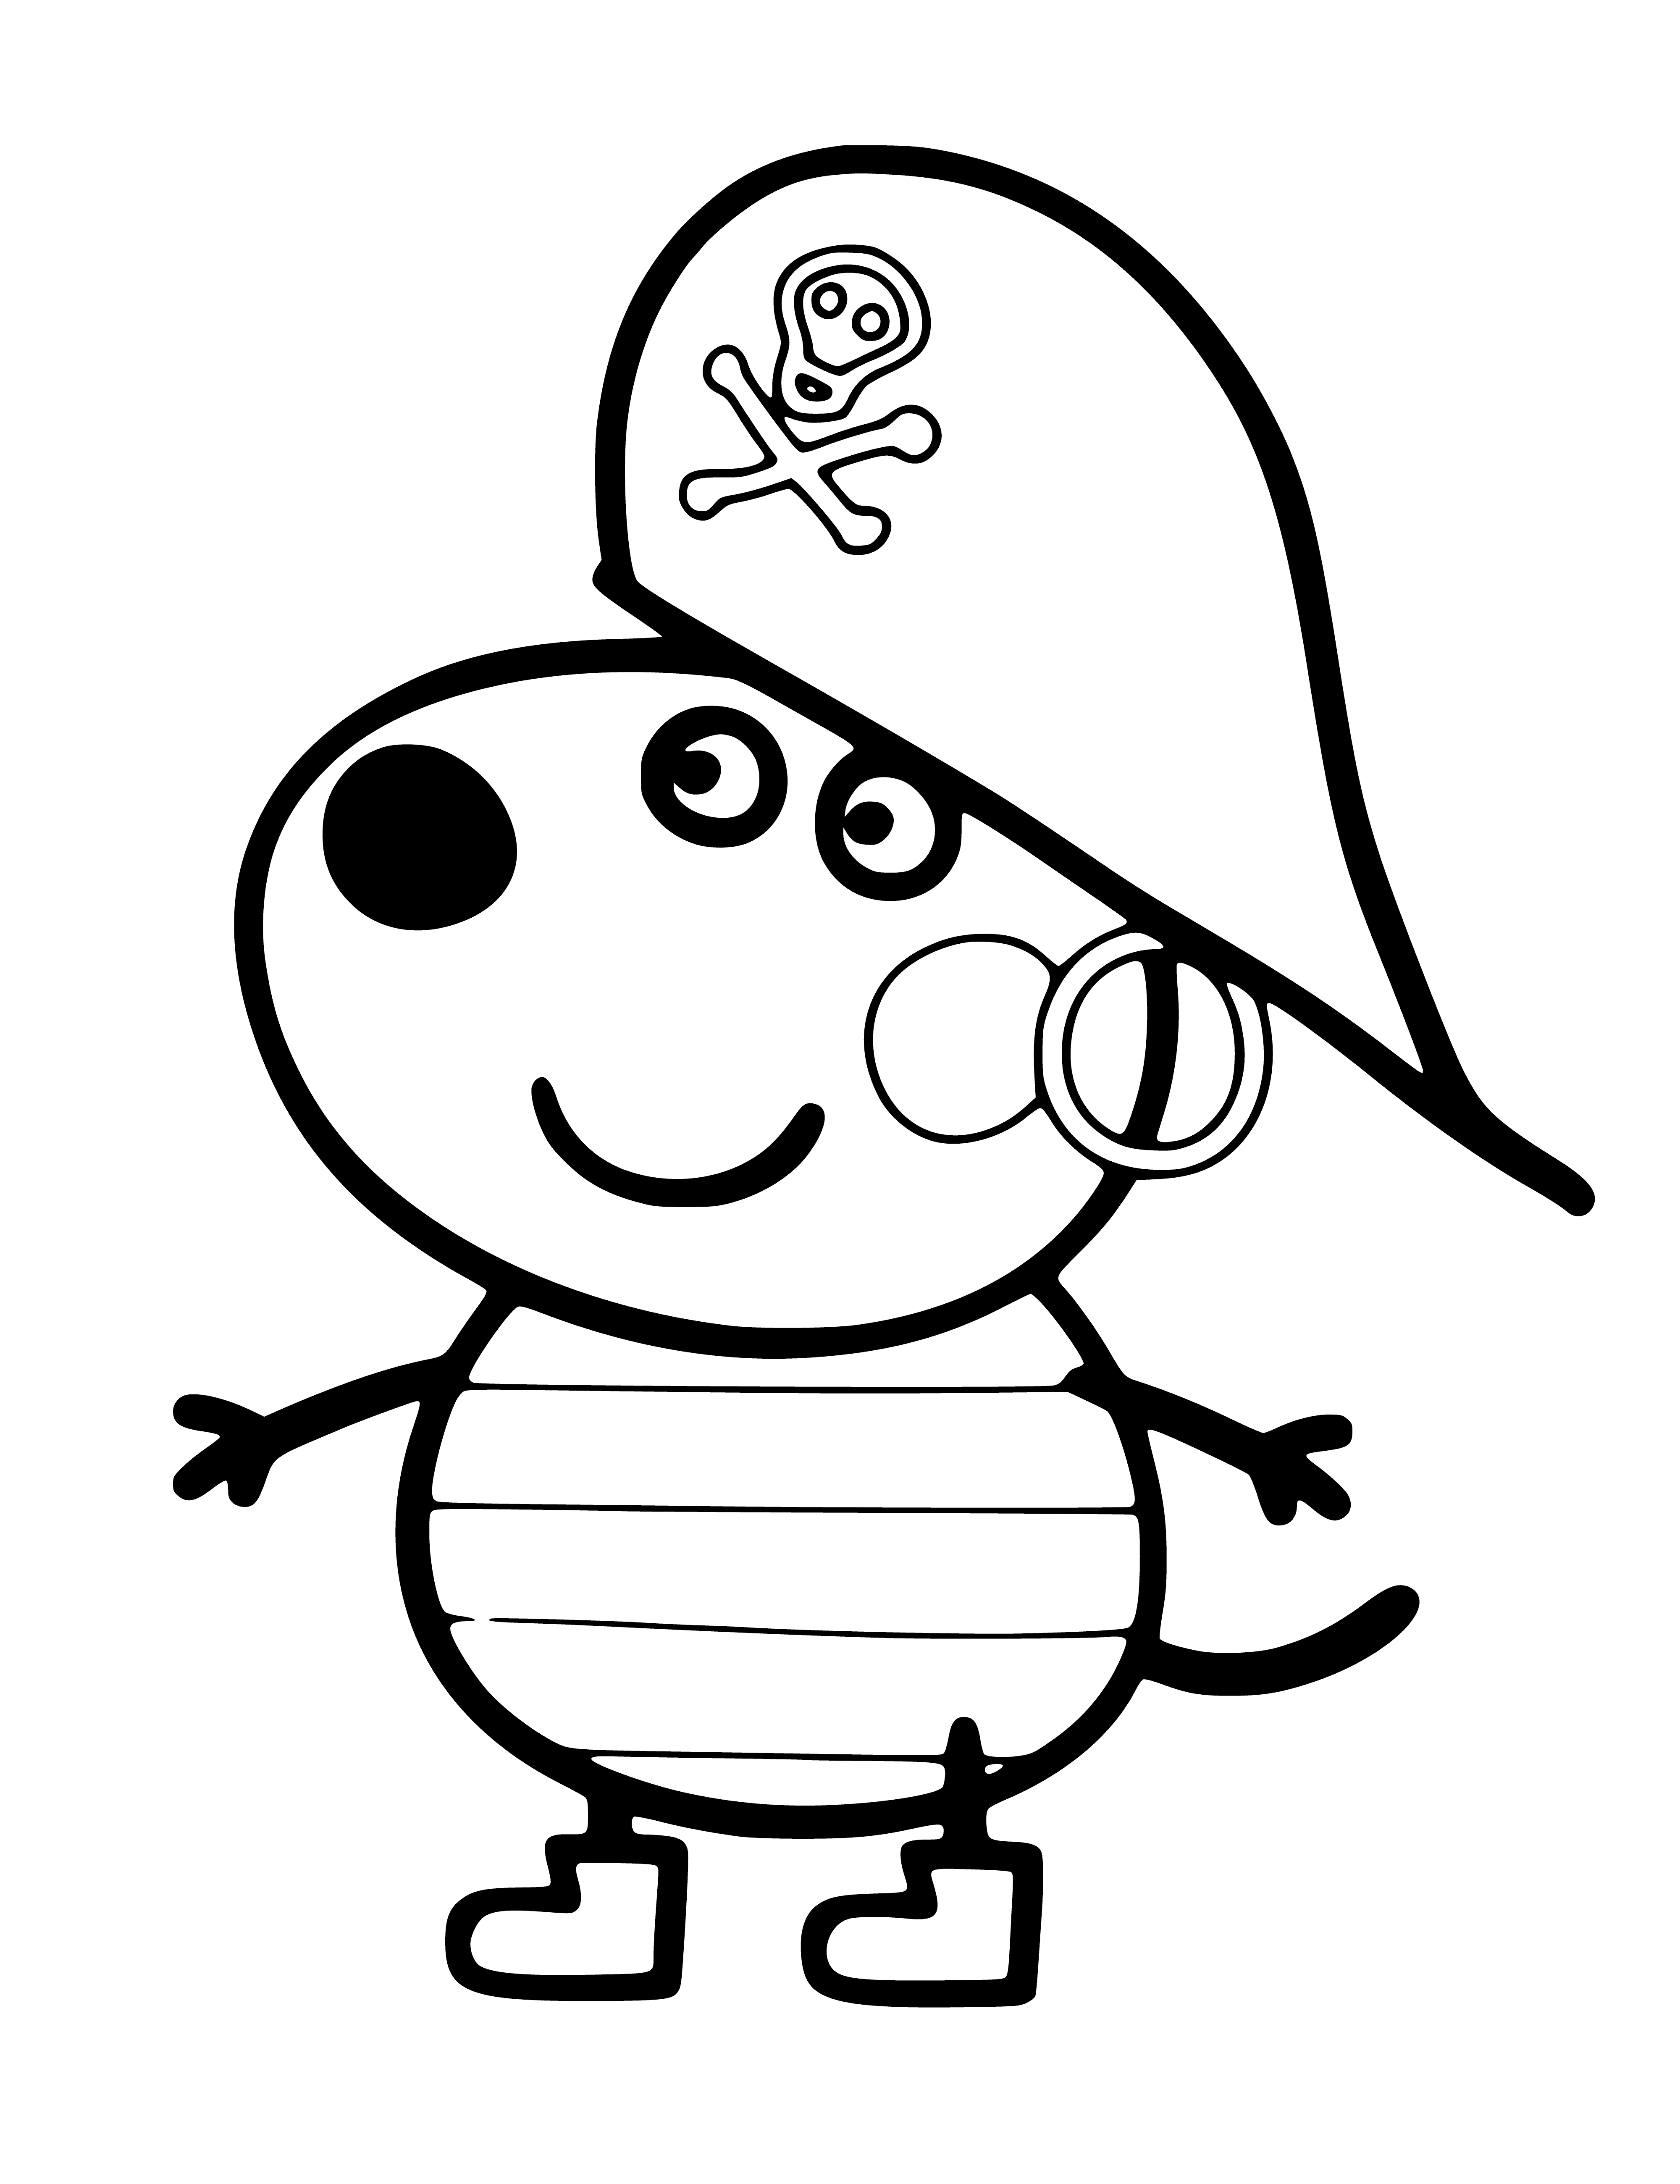 coloring page: Danny dog dressed like a pirate, wearing eye patch and sword, stands before a treasure chest.